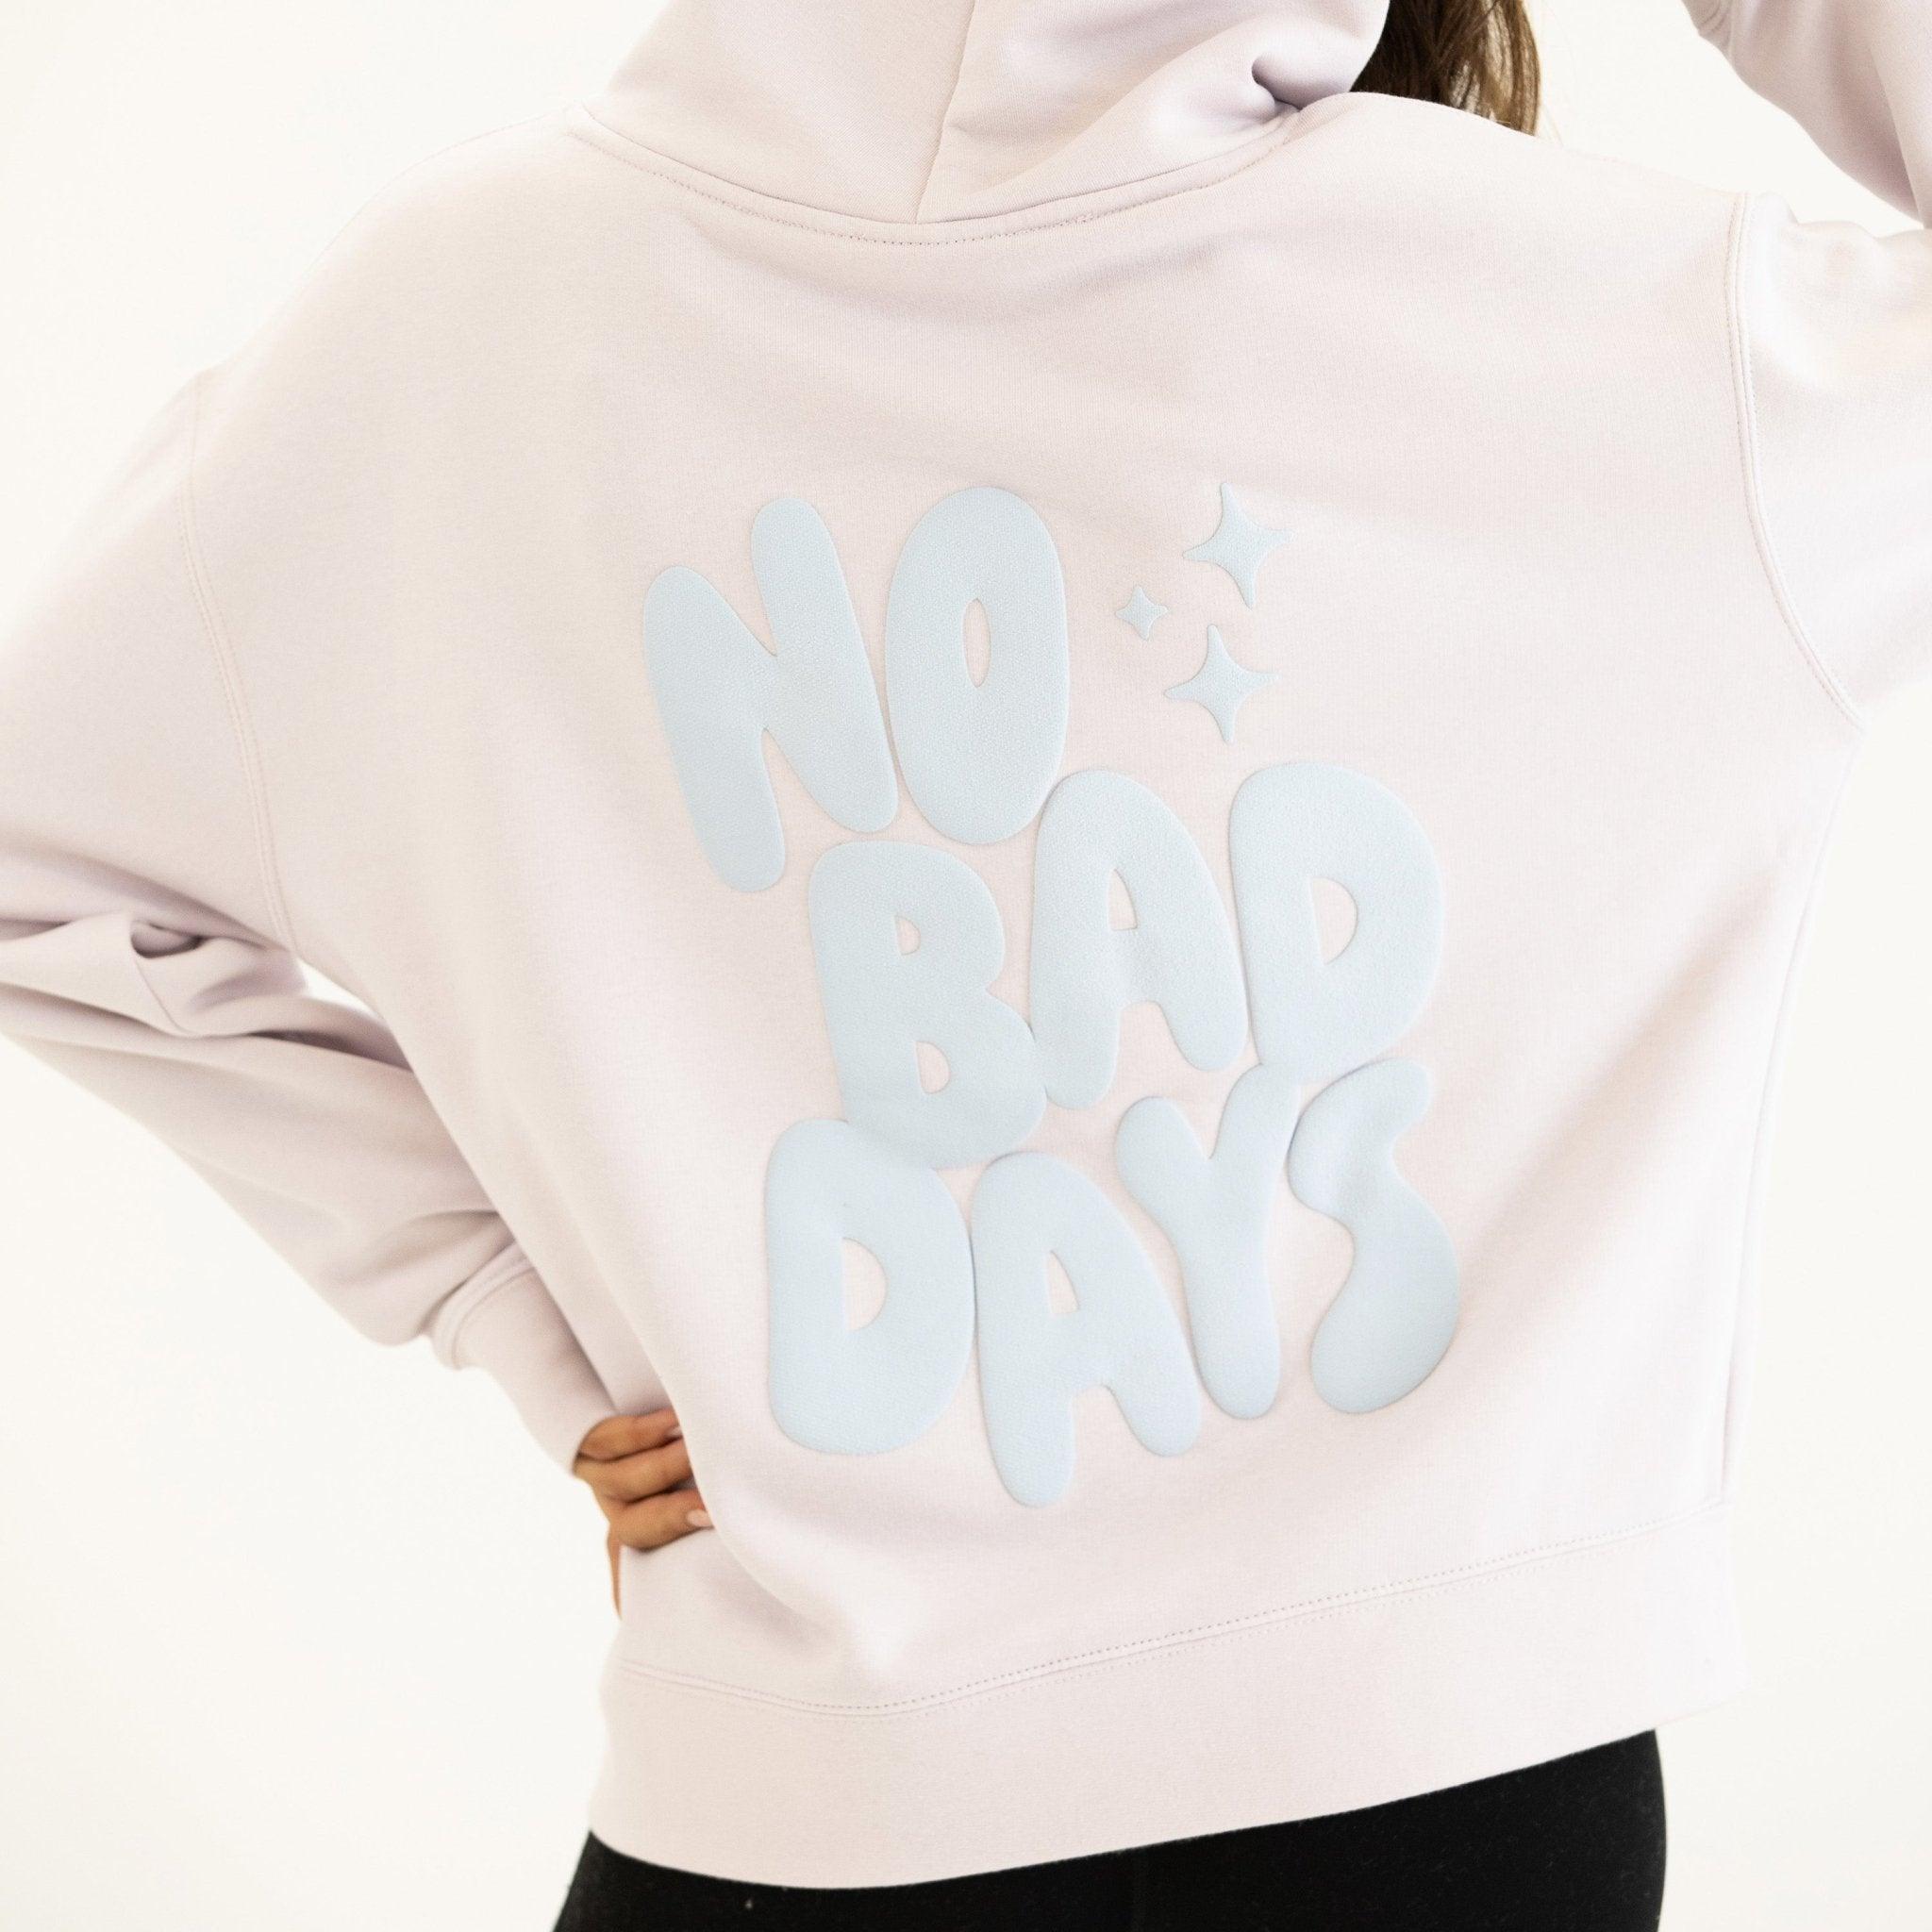 No Bad Day Relax Hoodie - Kecks